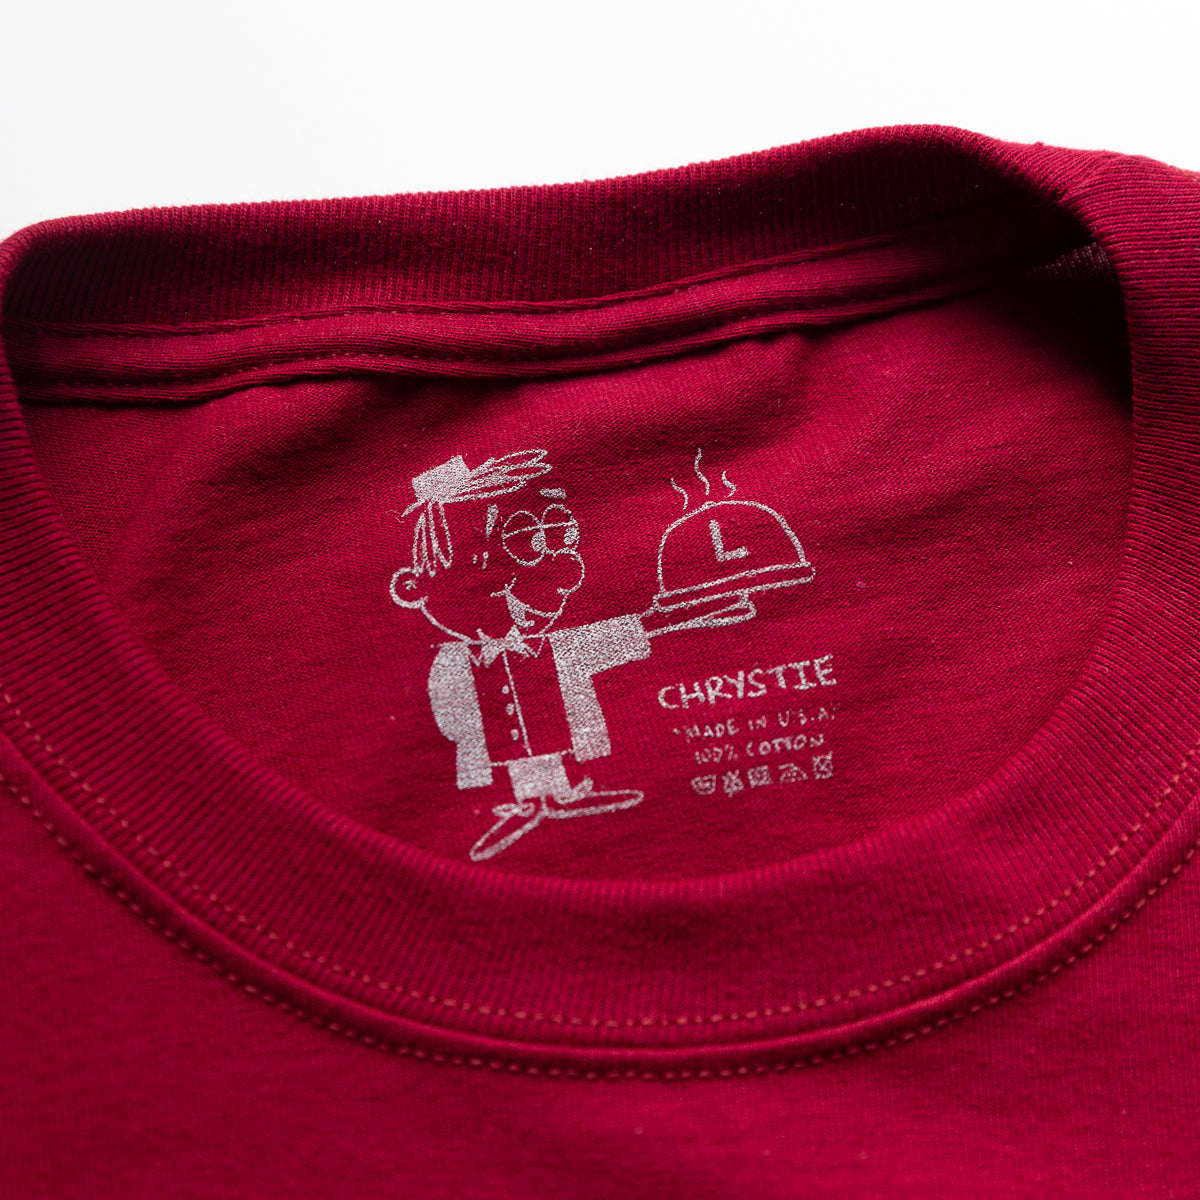 Load image into Gallery viewer, NYC Workers Long Sleeve MAROON